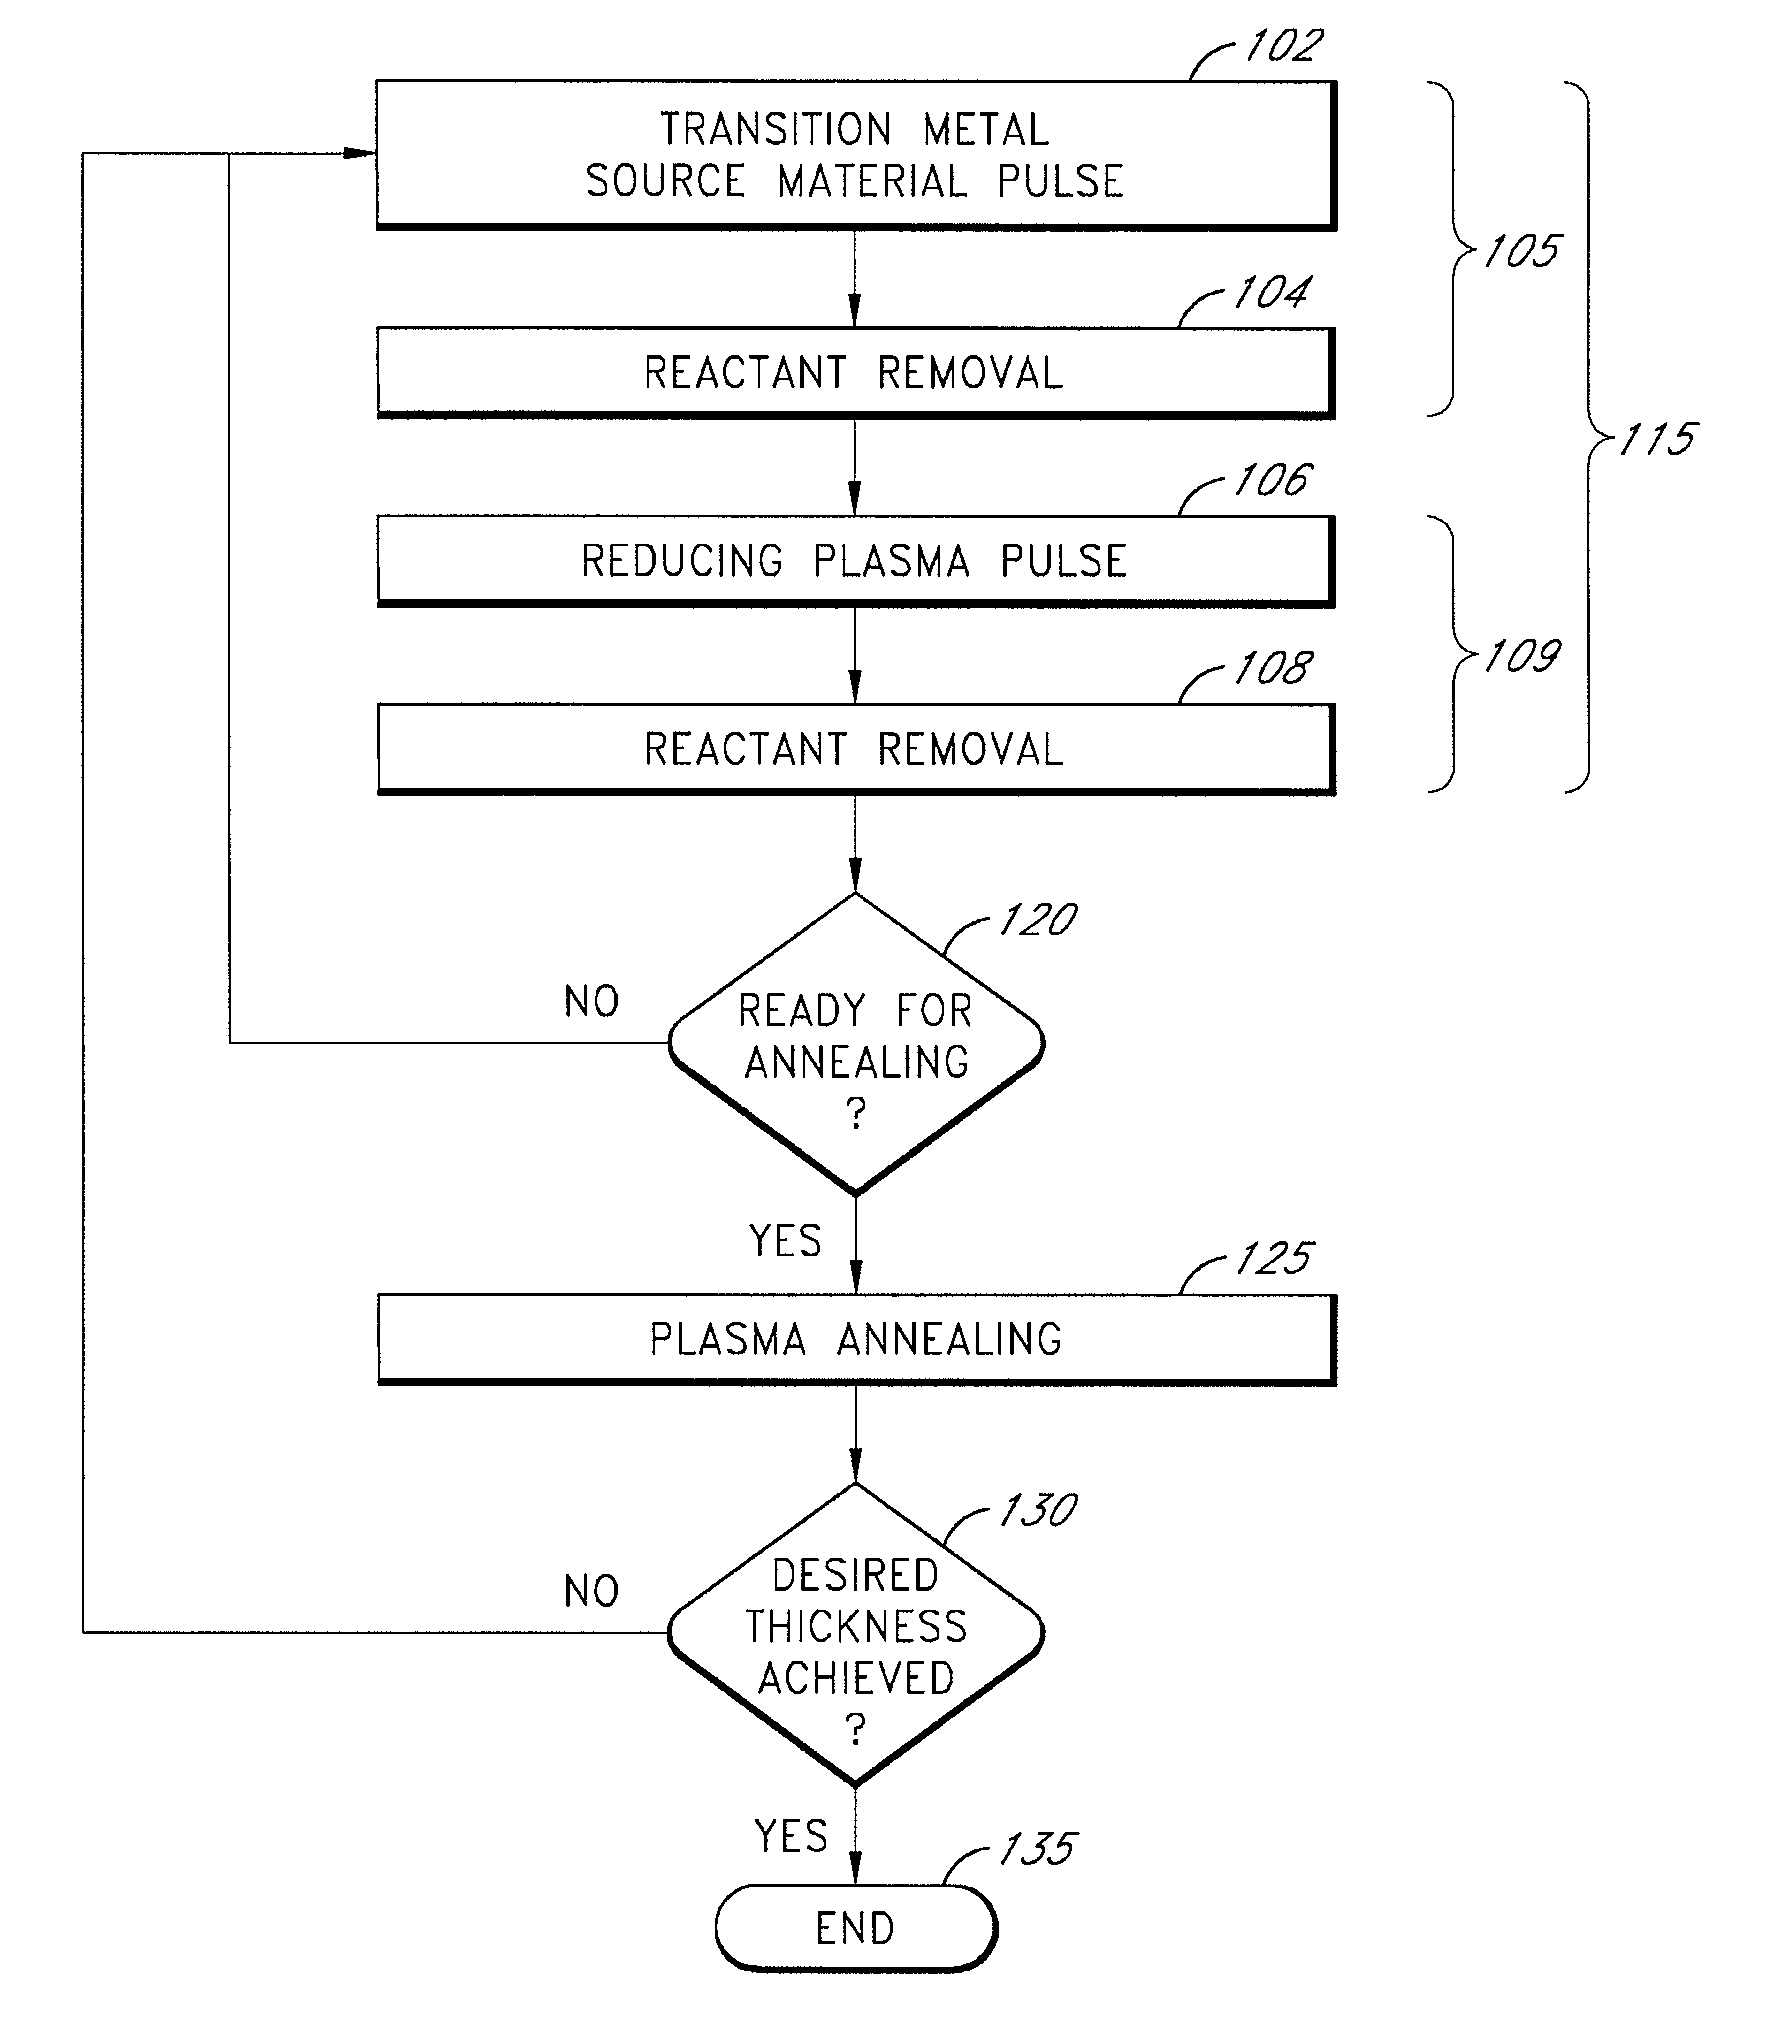 Periodic plasma annealing in an ALD-type process